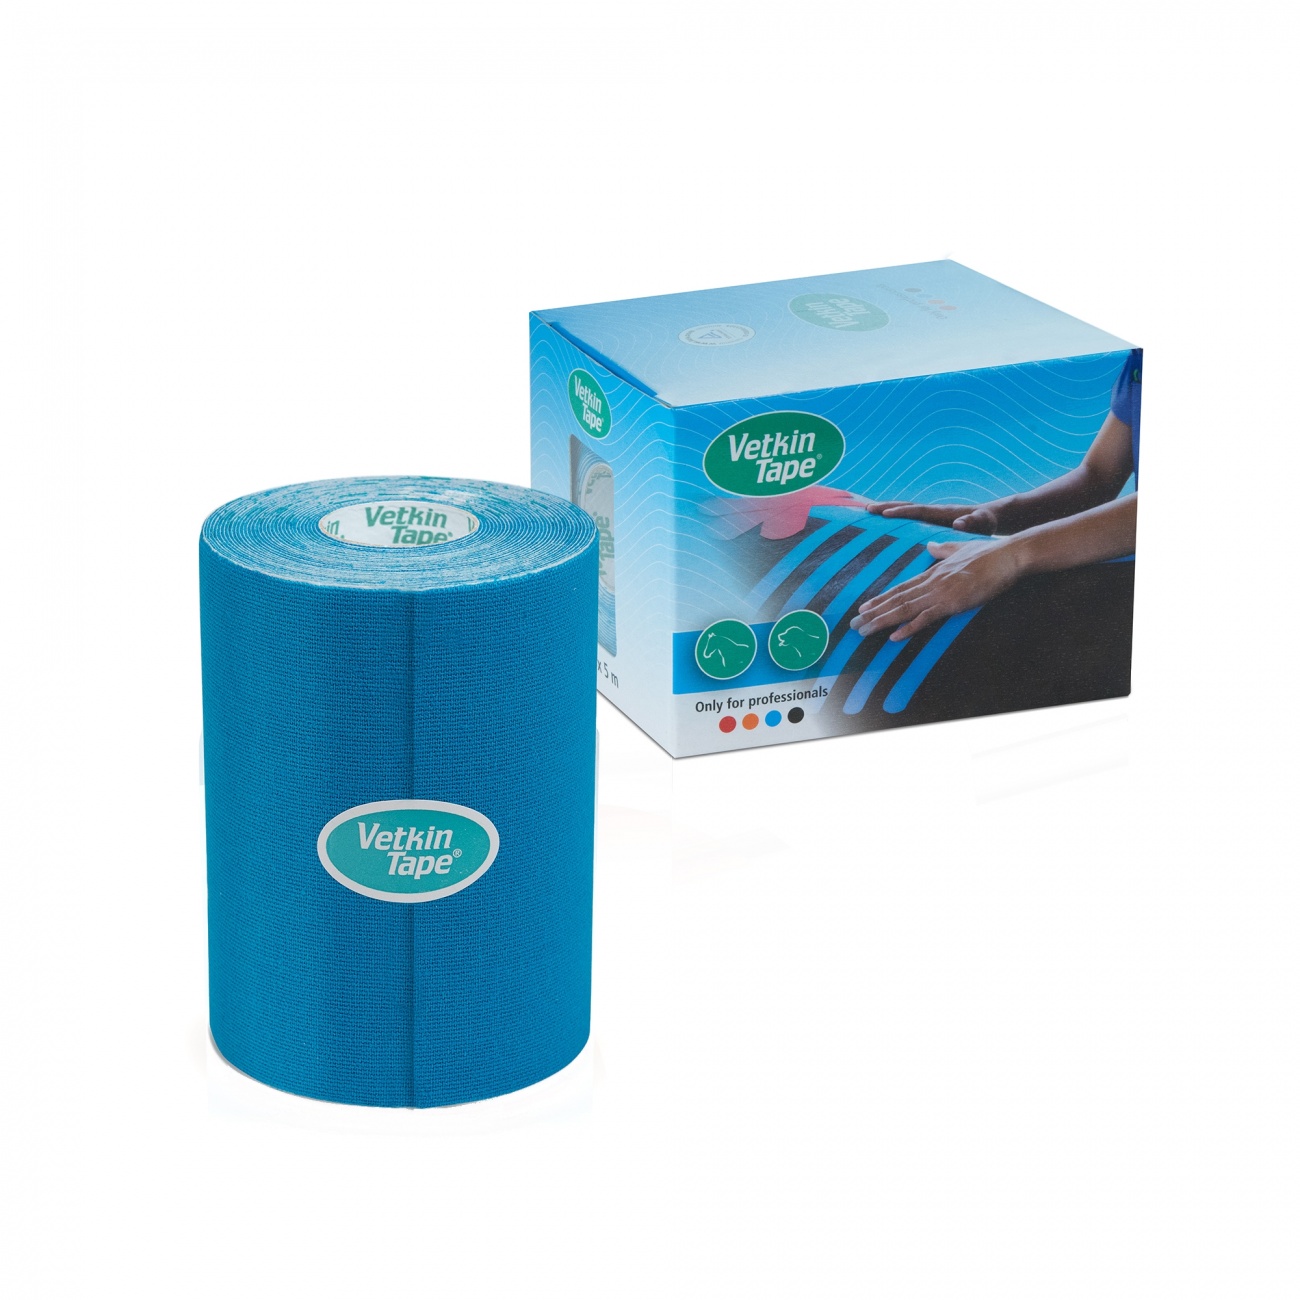 VetkinTape Kinesiology Tape 4" Roll and Box Blue